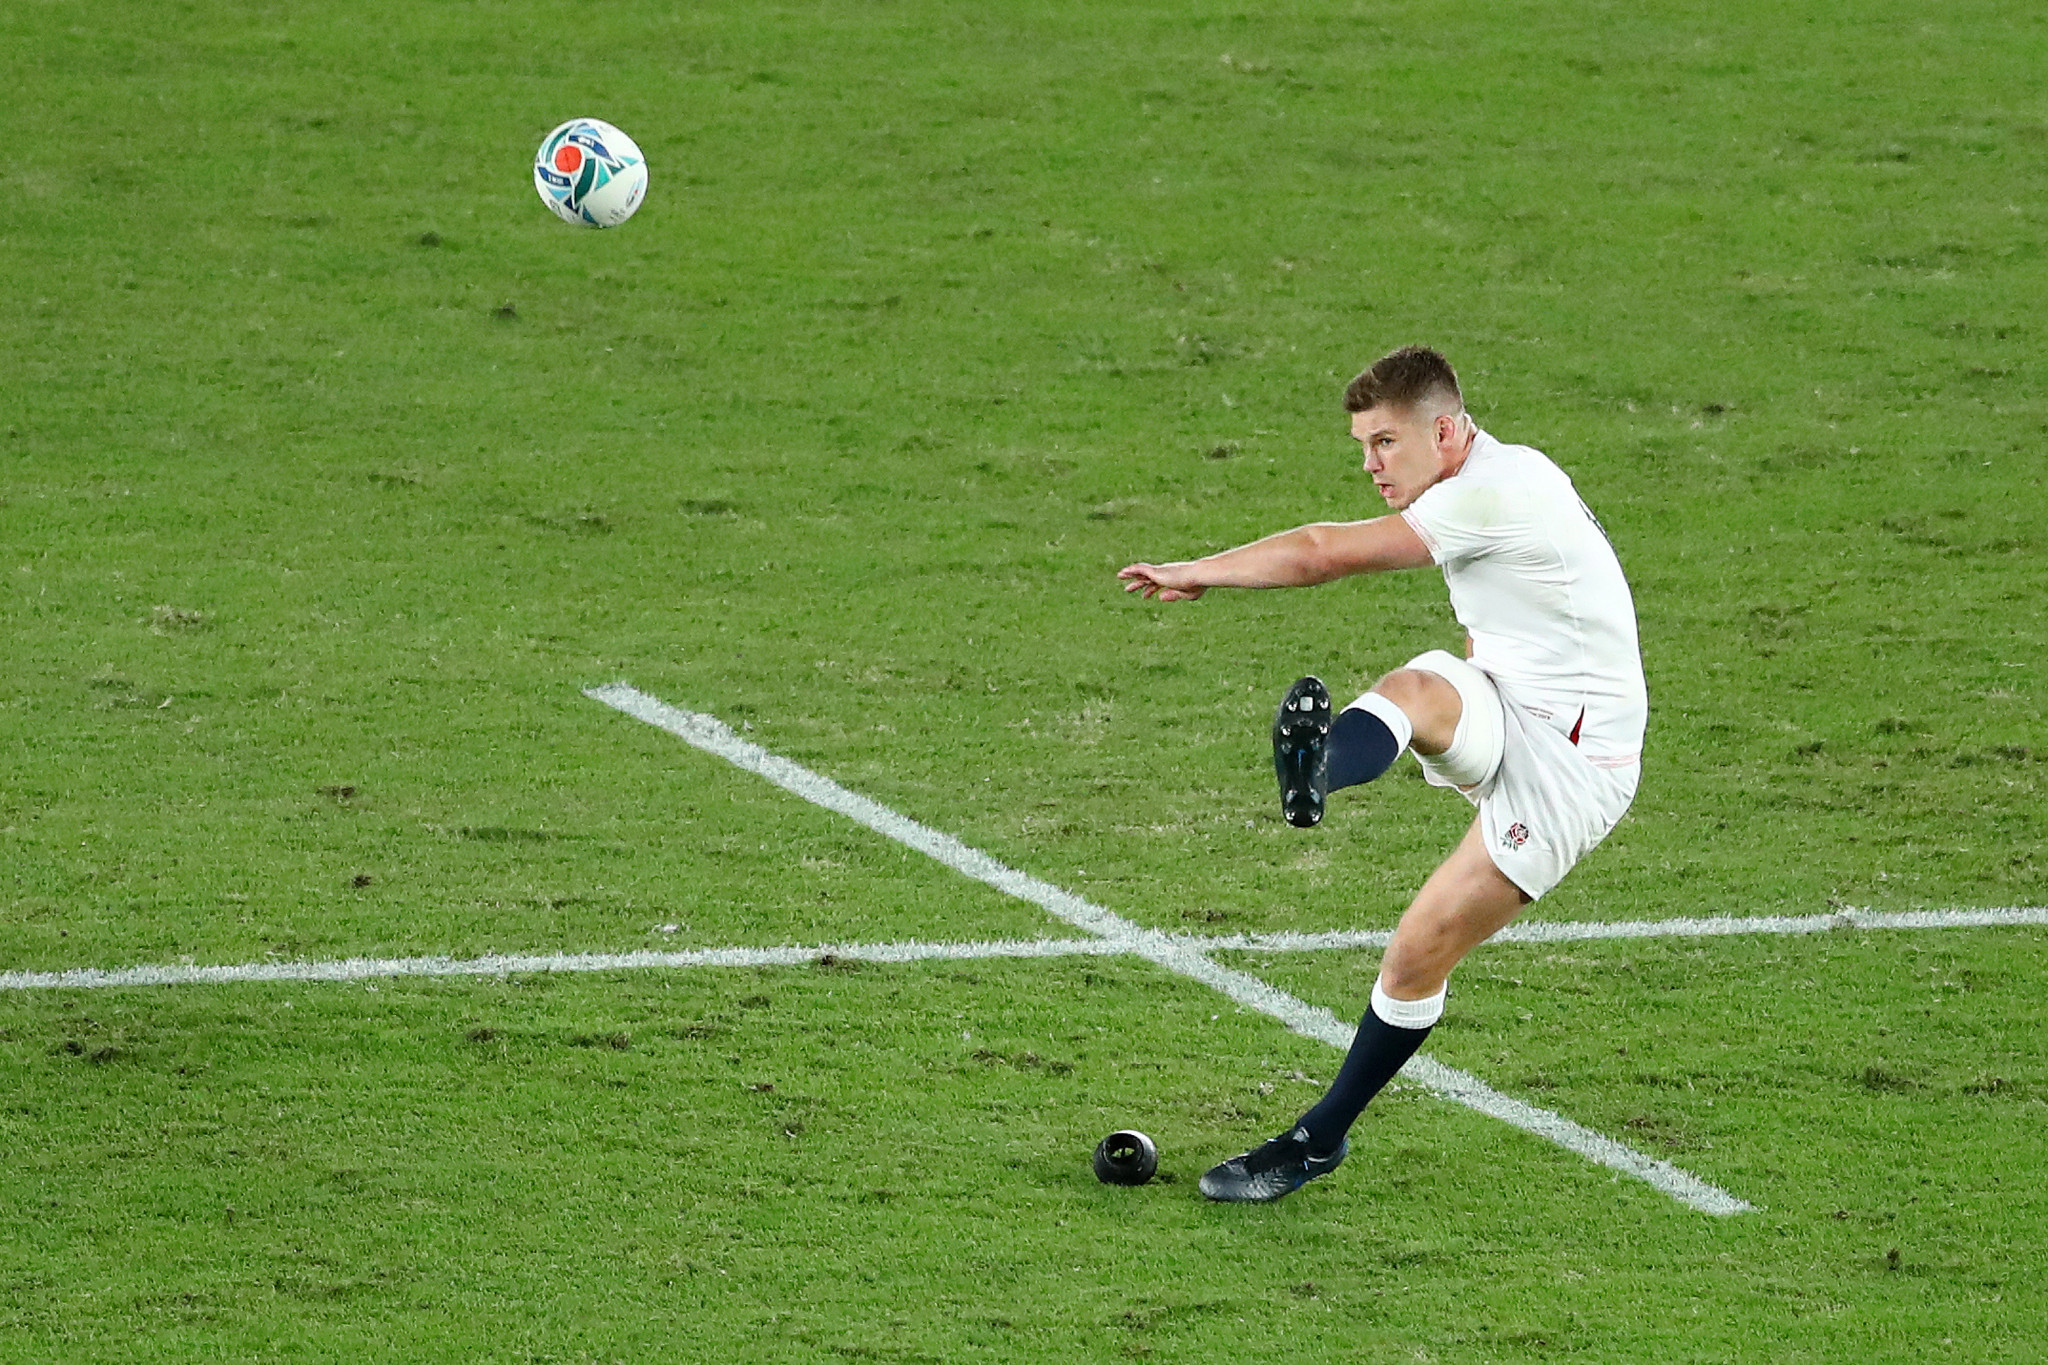 England captain Owen Farrell scored all 12 of his team's points ©Getty Images